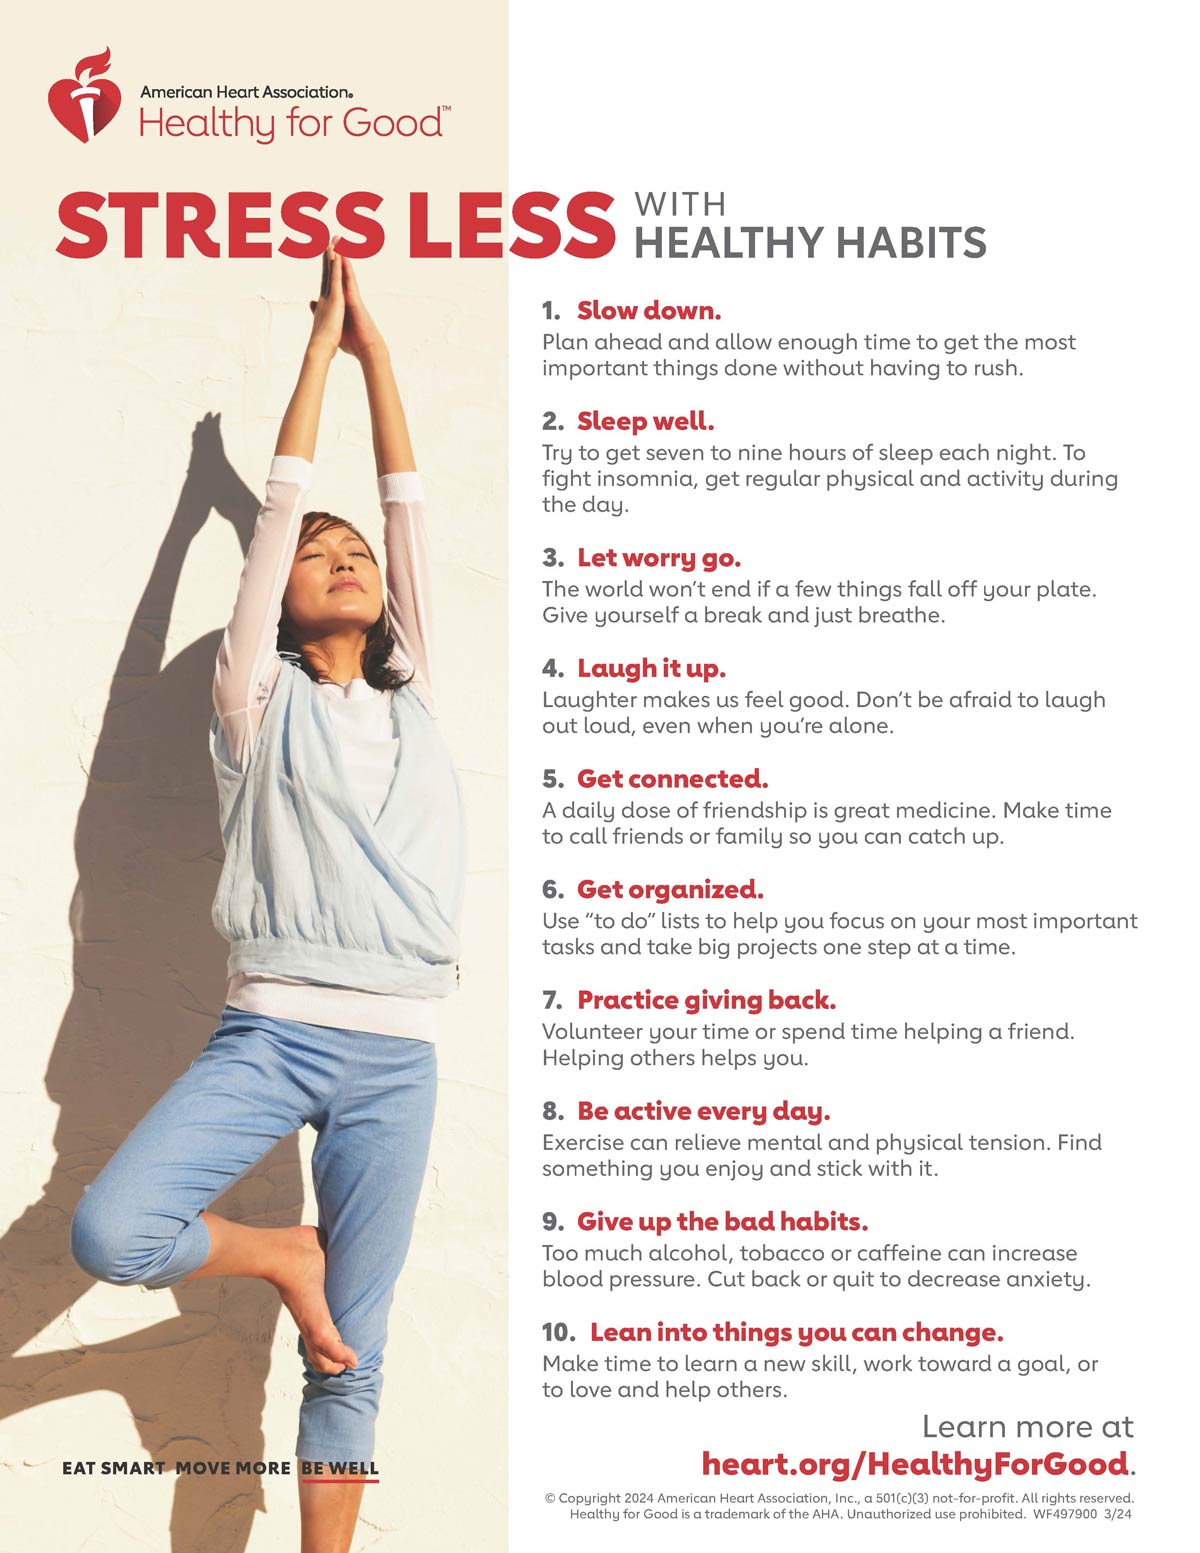 Health Guides: Healthy Lifestyle Includes Mind and Body - lksvzhb.space